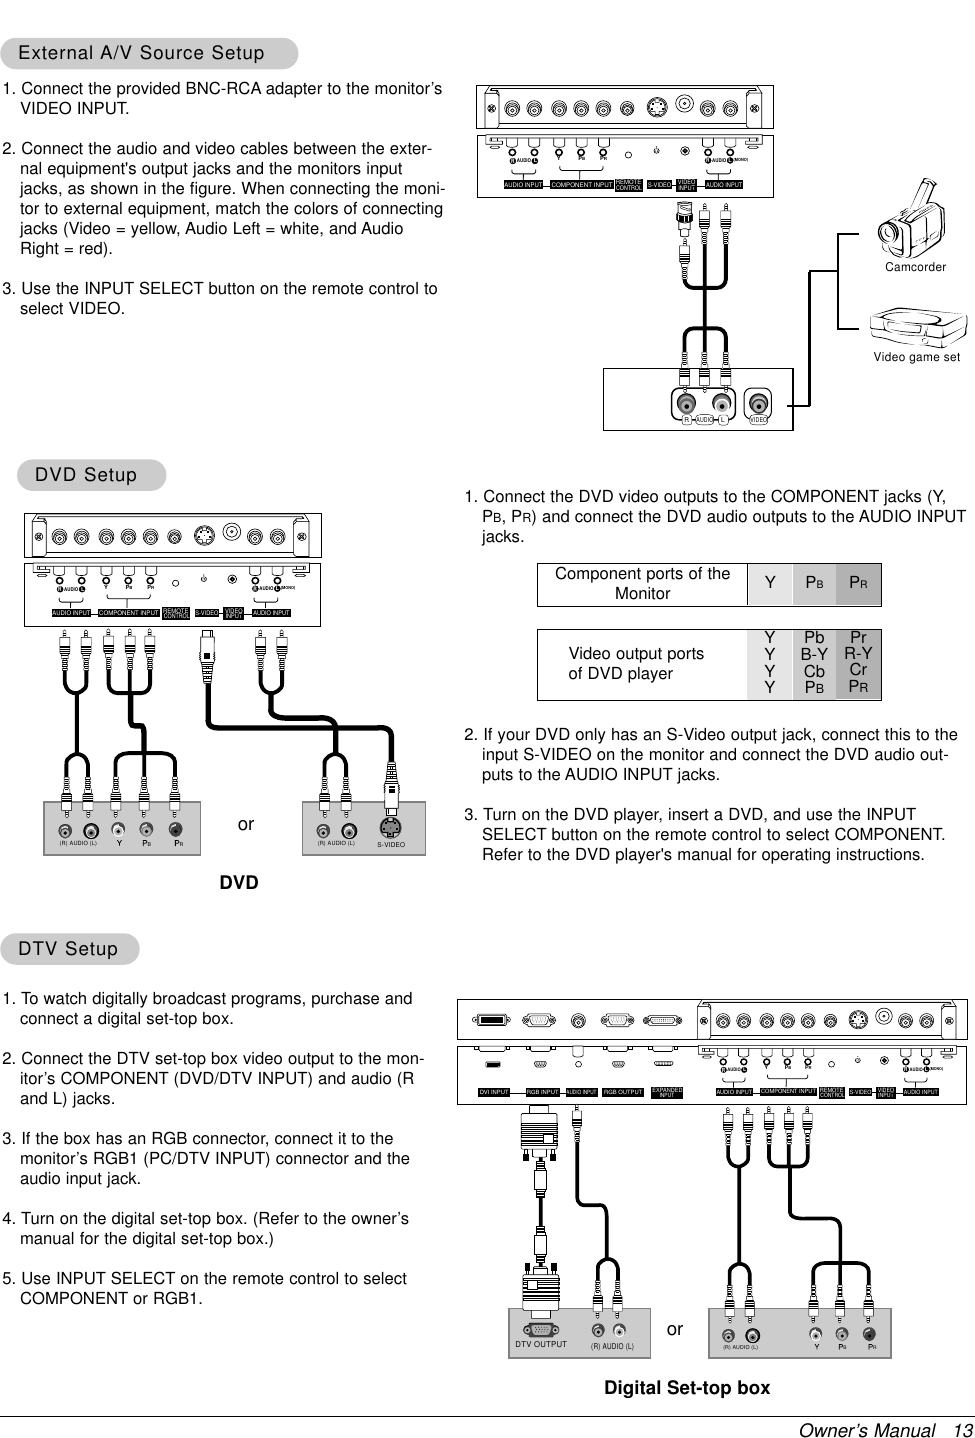 Owner’s Manual   131. To watch digitally broadcast programs, purchase andconnect a digital set-top box.2. Connect the DTV set-top box video output to the mon-itor’s COMPONENT (DVD/DTV INPUT) and audio (Rand L) jacks.3. If the box has an RGB connector, connect it to themonitor’s RGB1 (PC/DTV INPUT) connector and theaudio input jack.4. Turn on the digital set-top box. (Refer to the owner’smanual for the digital set-top box.) 5. Use INPUT SELECT on the remote control to selectCOMPONENT or RGB1.DTV SetupDTV Setup1. Connect the provided BNC-RCA adapter to the monitor’sVIDEO INPUT.2. Connect the audio and video cables between the exter-nal equipment&apos;s output jacks and the monitors inputjacks, as shown in the figure. When connecting the moni-tor to external equipment, match the colors of connectingjacks (Video = yellow, Audio Left = white, and AudioRight = red).3. Use the INPUT SELECT button on the remote control toselect VIDEO.Component ports of theMonitor Y PBPRVideo output ports of DVD playerYYYYPbB-YCbPBPrR-YCrPR1. Connect the DVD video outputs to the COMPONENT jacks (Y,PB, PR) and connect the DVD audio outputs to the AUDIO INPUTjacks.2. If your DVD only has an S-Video output jack, connect this to theinput S-VIDEO on the monitor and connect the DVD audio out-puts to the AUDIO INPUT jacks.3. Turn on the DVD player, insert a DVD, and use the INPUTSELECT button on the remote control to select COMPONENT.Refer to the DVD player&apos;s manual for operating instructions.External External A/V Source SetupA/V Source SetupDVD SetupDVD SetupRLAUDIO VIDEOVideo game setCamcorderVIDEOINPUTYPBPR(MONO)RAUDIOLRAUDIOLS-VIDEO AUDIO INPUTAUDIO INPUT REMOTECONTROLCOMPONENT INPUTBR(R) AUDIO (L)DTV OUTPUT(R) AUDIO (L)VIDEOINPUTYPBPR(MONO)RAUDIOLRAUDIOLS-VIDEO AUDIO INPUTAUDIO INPUT REMOTECONTROLEXPANDEDINPUTAUDIO INPUTDVI INPUT RGB INPUT RGB OUTPUTCOMPONENT INPUTBR(R) AUDIO (L) (R) AUDIO (L)S-VIDEOVIDEOINPUTYPBPR(MONO)RAUDIOLRAUDIOLS-VIDEO AUDIO INPUTAUDIO INPUT REMOTECONTROLCOMPONENT INPUTDVDorDigital Set-top boxor